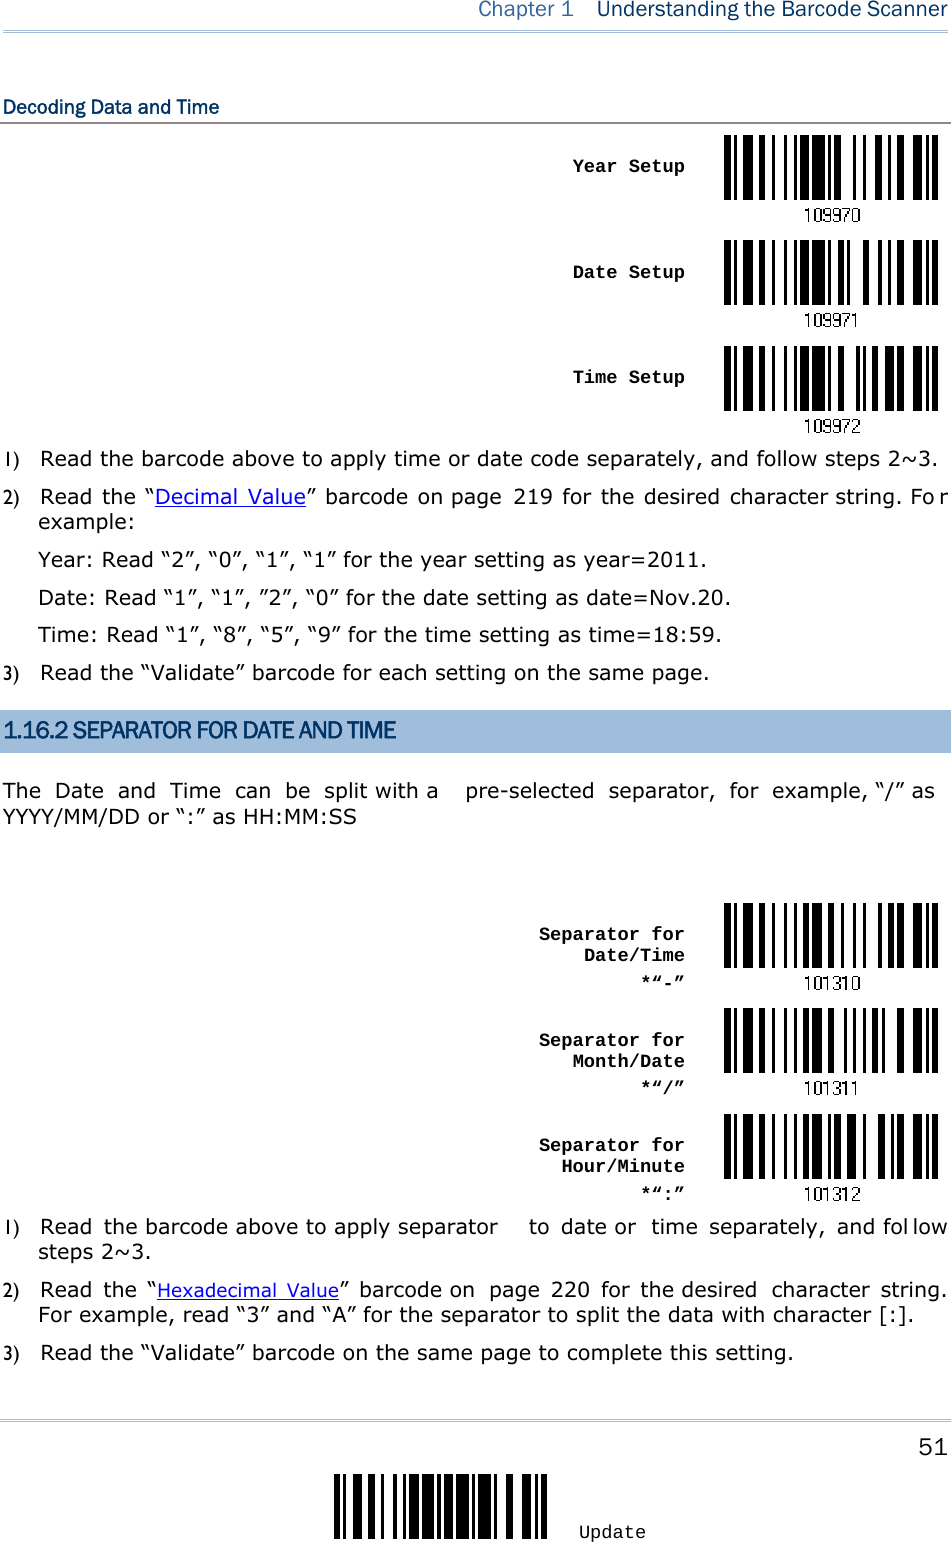     51 Update  Chapter 1  Understanding the Barcode Scanner  Decoding Data and Time  Year Setup Date Setup Time Setup1) Read the barcode above to apply time or date code separately, and follow steps 2~3.   2) Read the “Decimal Value” barcode on page 219 for the desired character string. Fo r example: Year: Read “2”, “0”, “1”, “1” for the year setting as year=2011.   Date: Read “1”, “1”, ”2”, “0” for the date setting as date=Nov.20. Time: Read “1”, “8”, “5”, “9” for the time setting as time=18:59. 3) Read the “Validate” barcode for each setting on the same page. 1.16.2 SEPARATOR FOR DATE AND TIME The Date and Time can be split with a  pre-selected separator, for example, “/” as YYYY/MM/DD or “:” as HH:MM:SS   Separator for Date/Time*“-” Separator for Month/Date*“/” Separator for Hour/Minute*“:”1) Read the barcode above to apply separator  to date or  time separately, and fol low steps 2~3.   2) Read the “Hexadecimal Value” barcode on  page 220 for the desired  character string. For example, read “3” and “A” for the separator to split the data with character [:]. 3) Read the “Validate” barcode on the same page to complete this setting. 